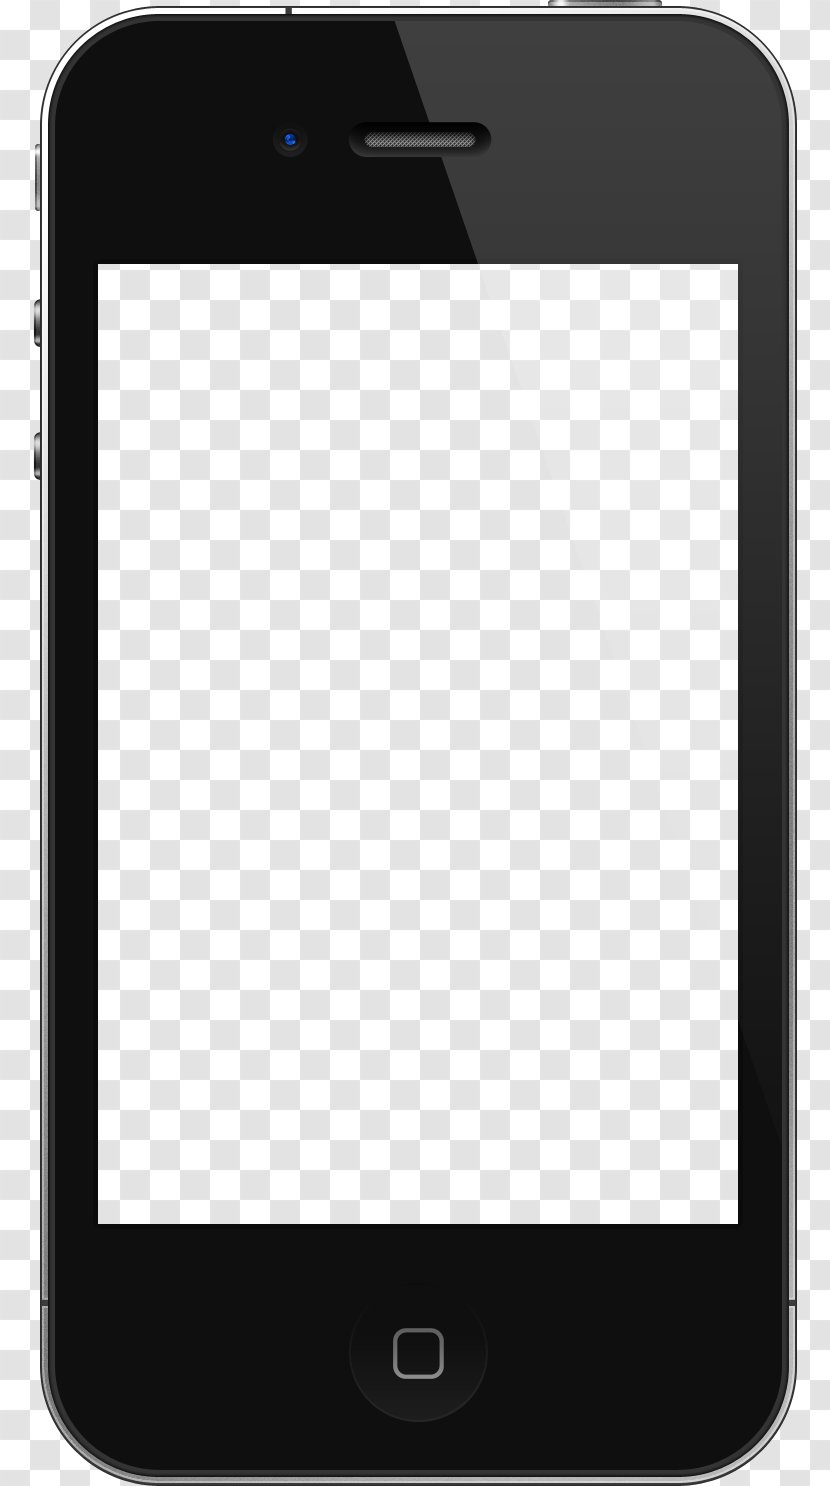 IPhone 4 6 IPod Touch Template - Portable Media Player - Iphone Apple Transparent PNG